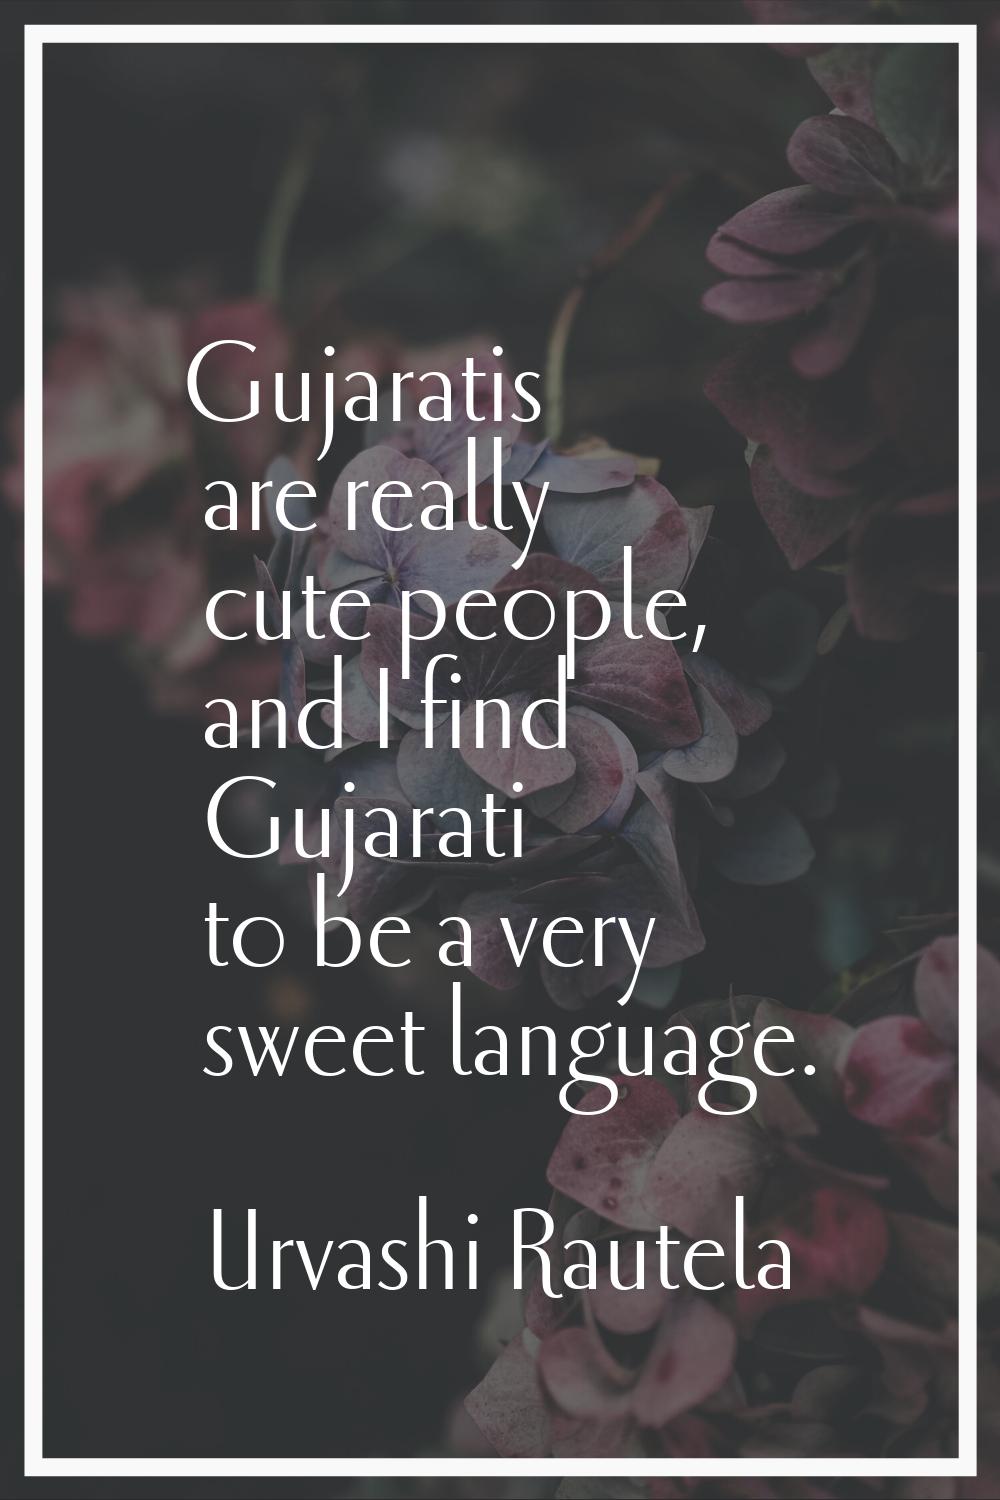 Gujaratis are really cute people, and I find Gujarati to be a very sweet language.